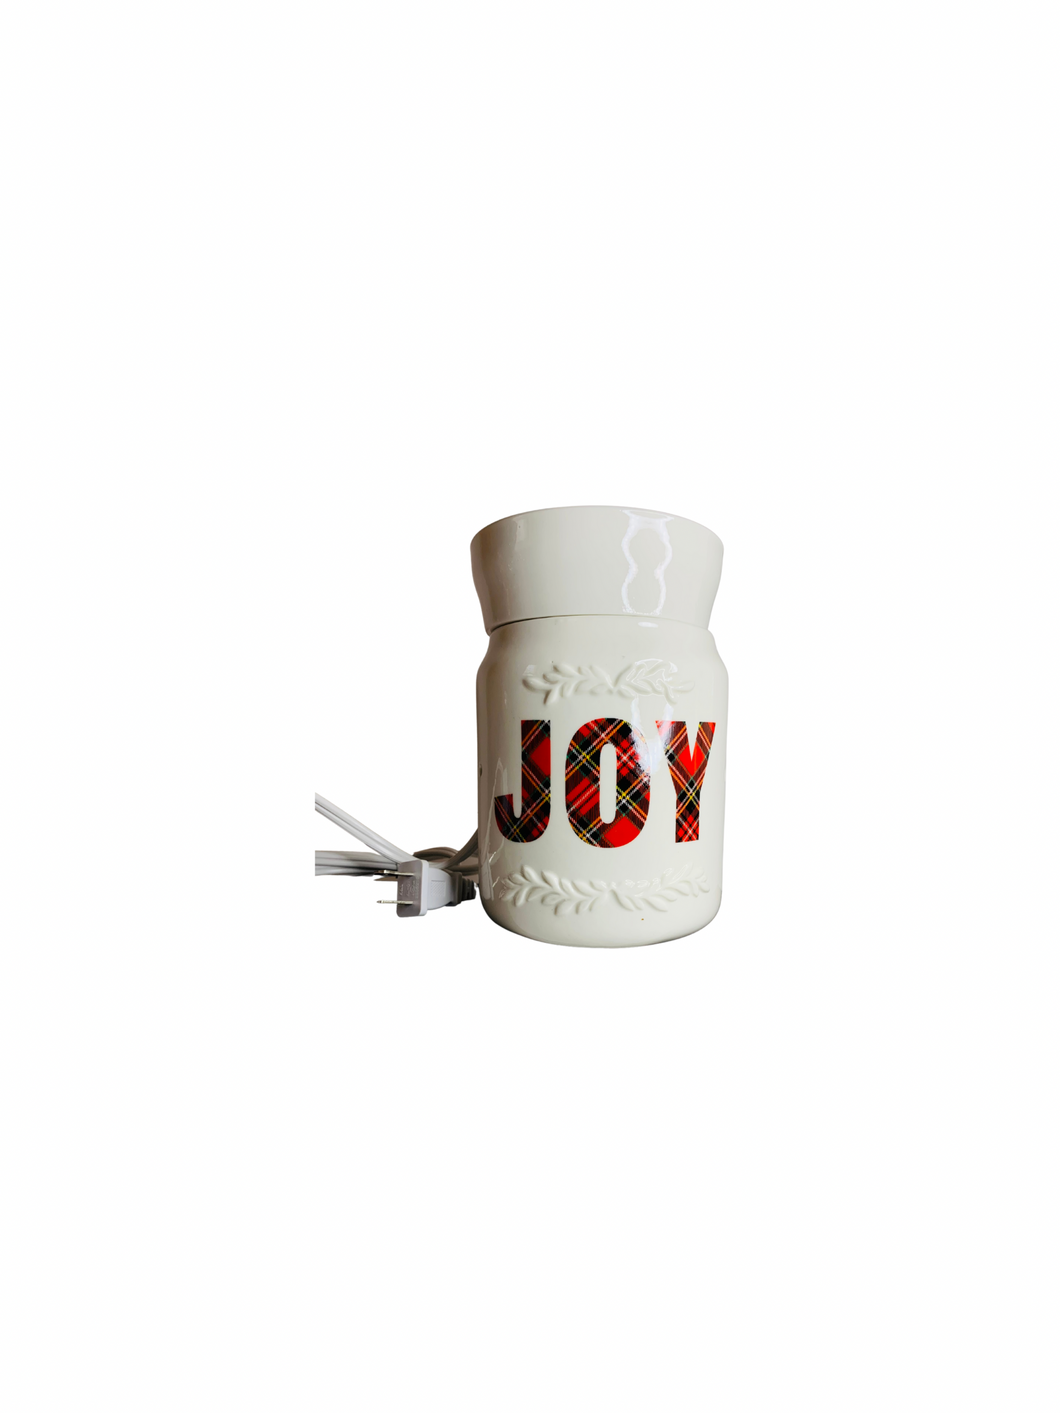 Holiday Tart Warmers- Santa or Joy Lettering -Electric